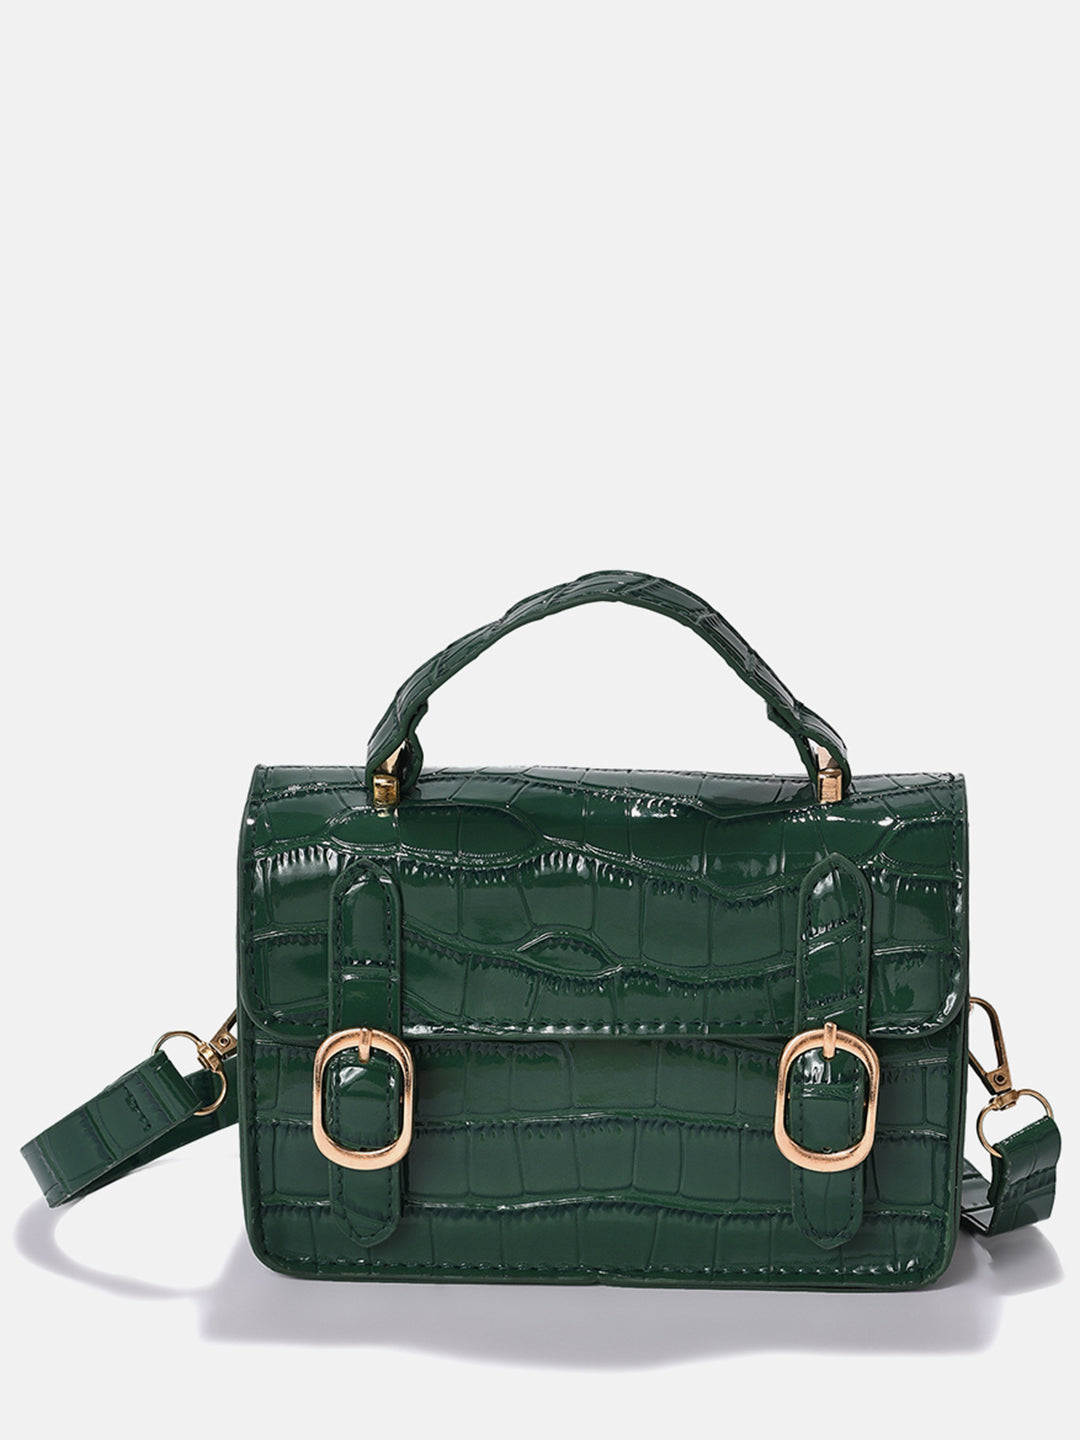 Green Colourblocked Vegan Leather Structured Hobo Bag With Quilted